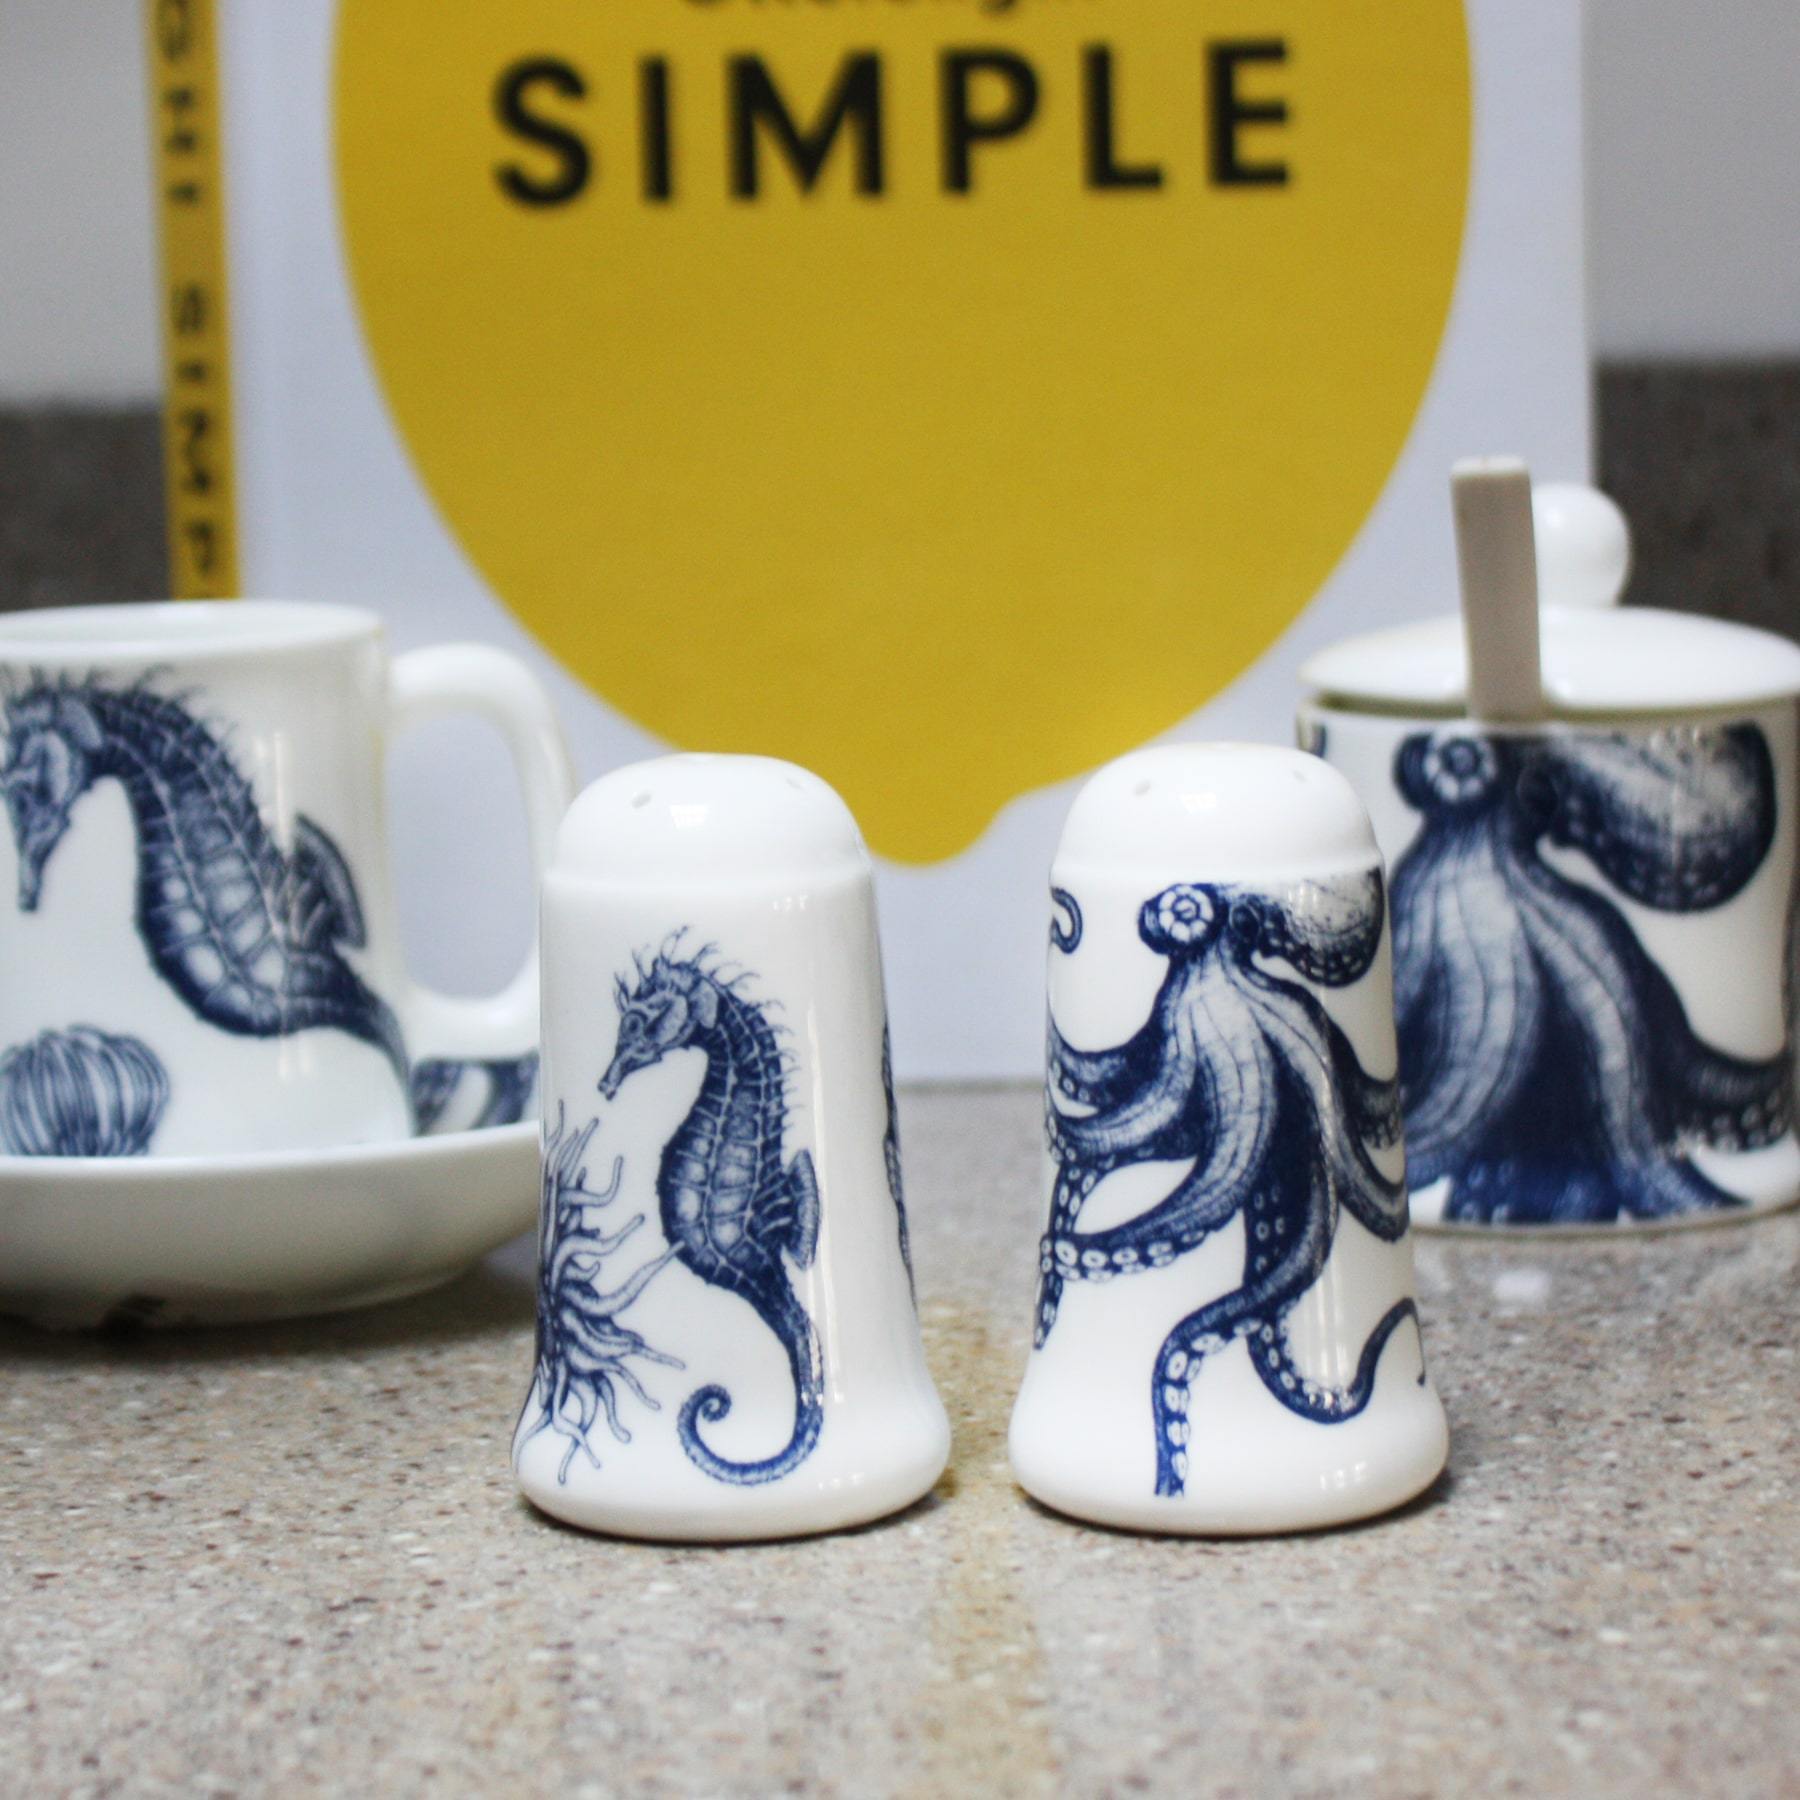 Bone china salt an pepper pots in our classic navy and white.Salt has seahorse, shell and an anenome on and the pepper has an octopus.These are both placed in from of an octopus Jam pot and a seahorse jug,in the background you can see a cookbook